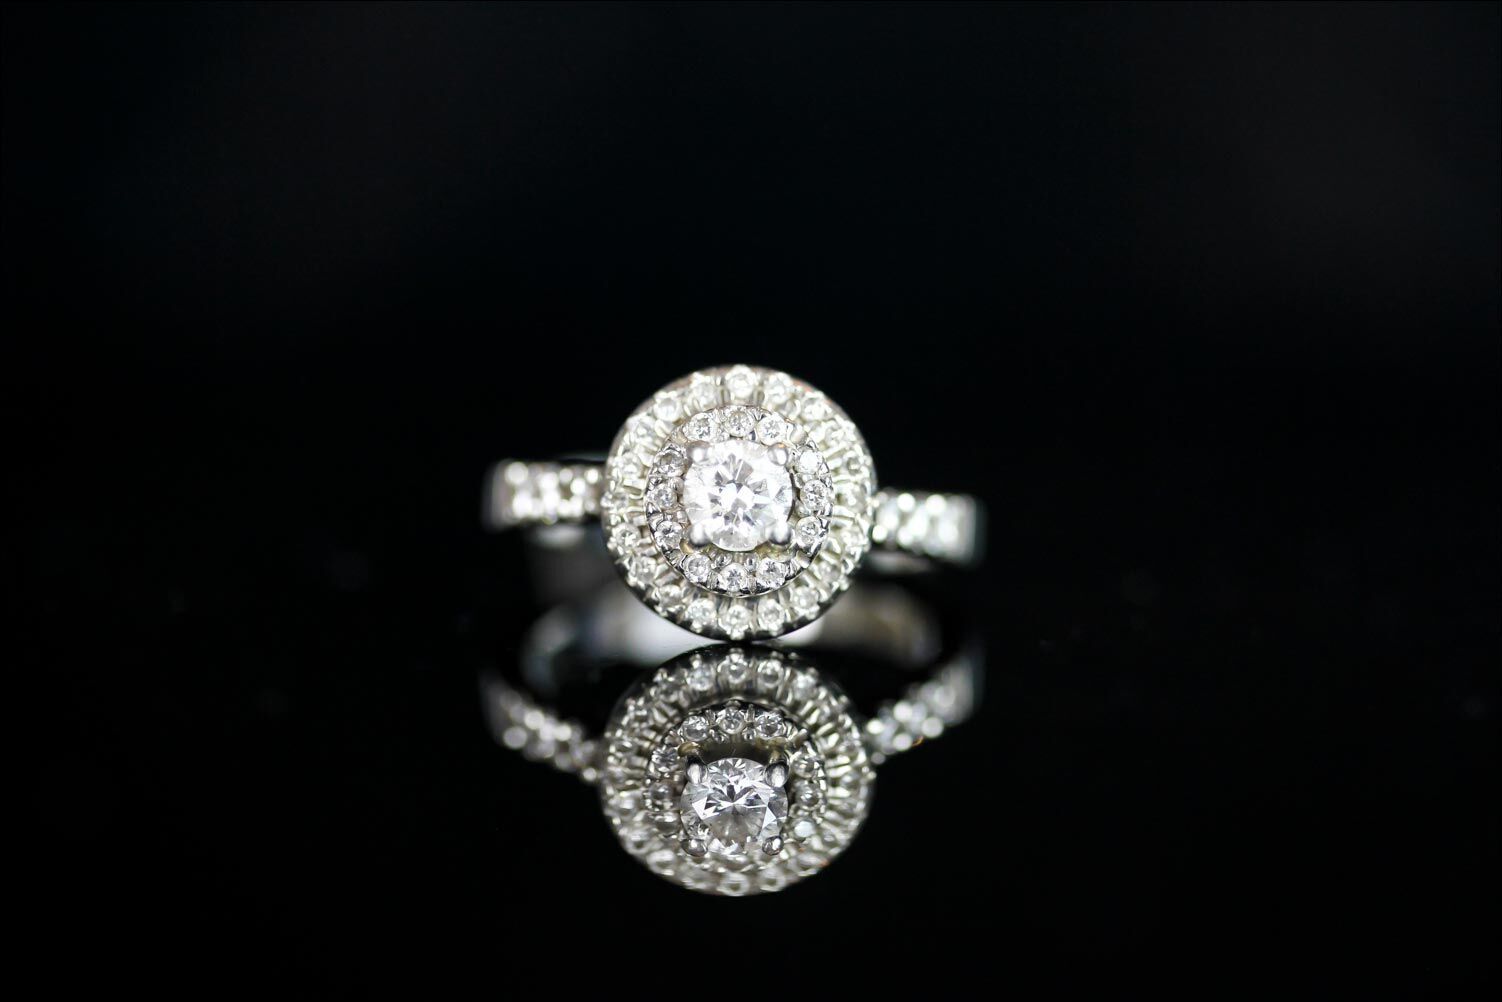 PLATINUM DIAMOND CLUSTER, centre stone estimated 0.32ct, ring size leading edge R 1/2,total weight 8